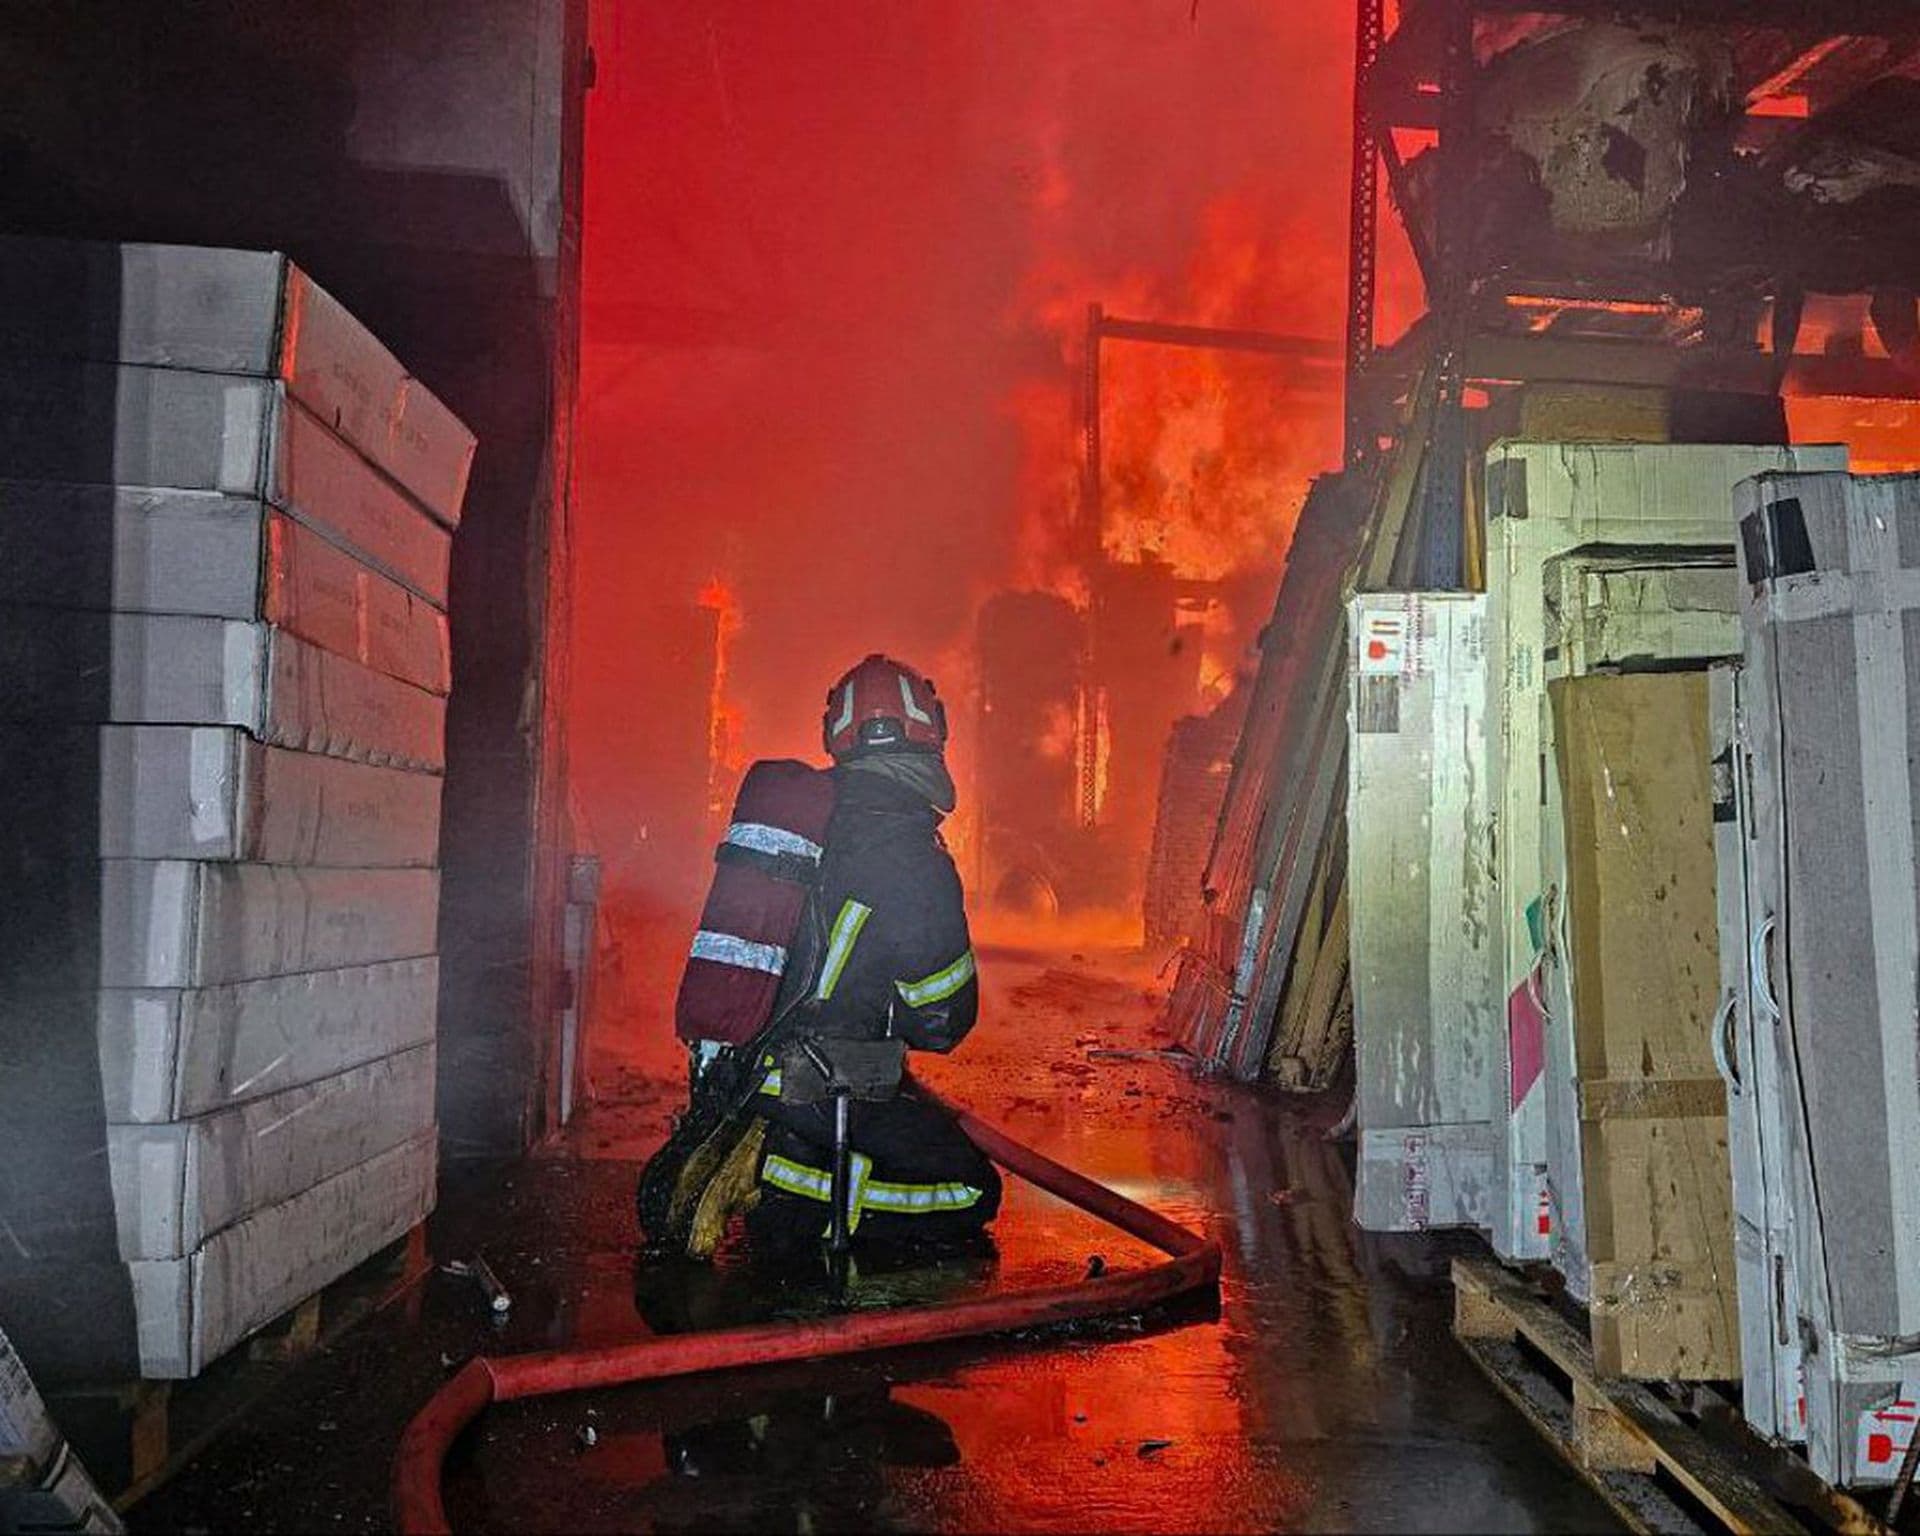 emergency services personnel work to extinguish a fire following a Russian attack in Lviv